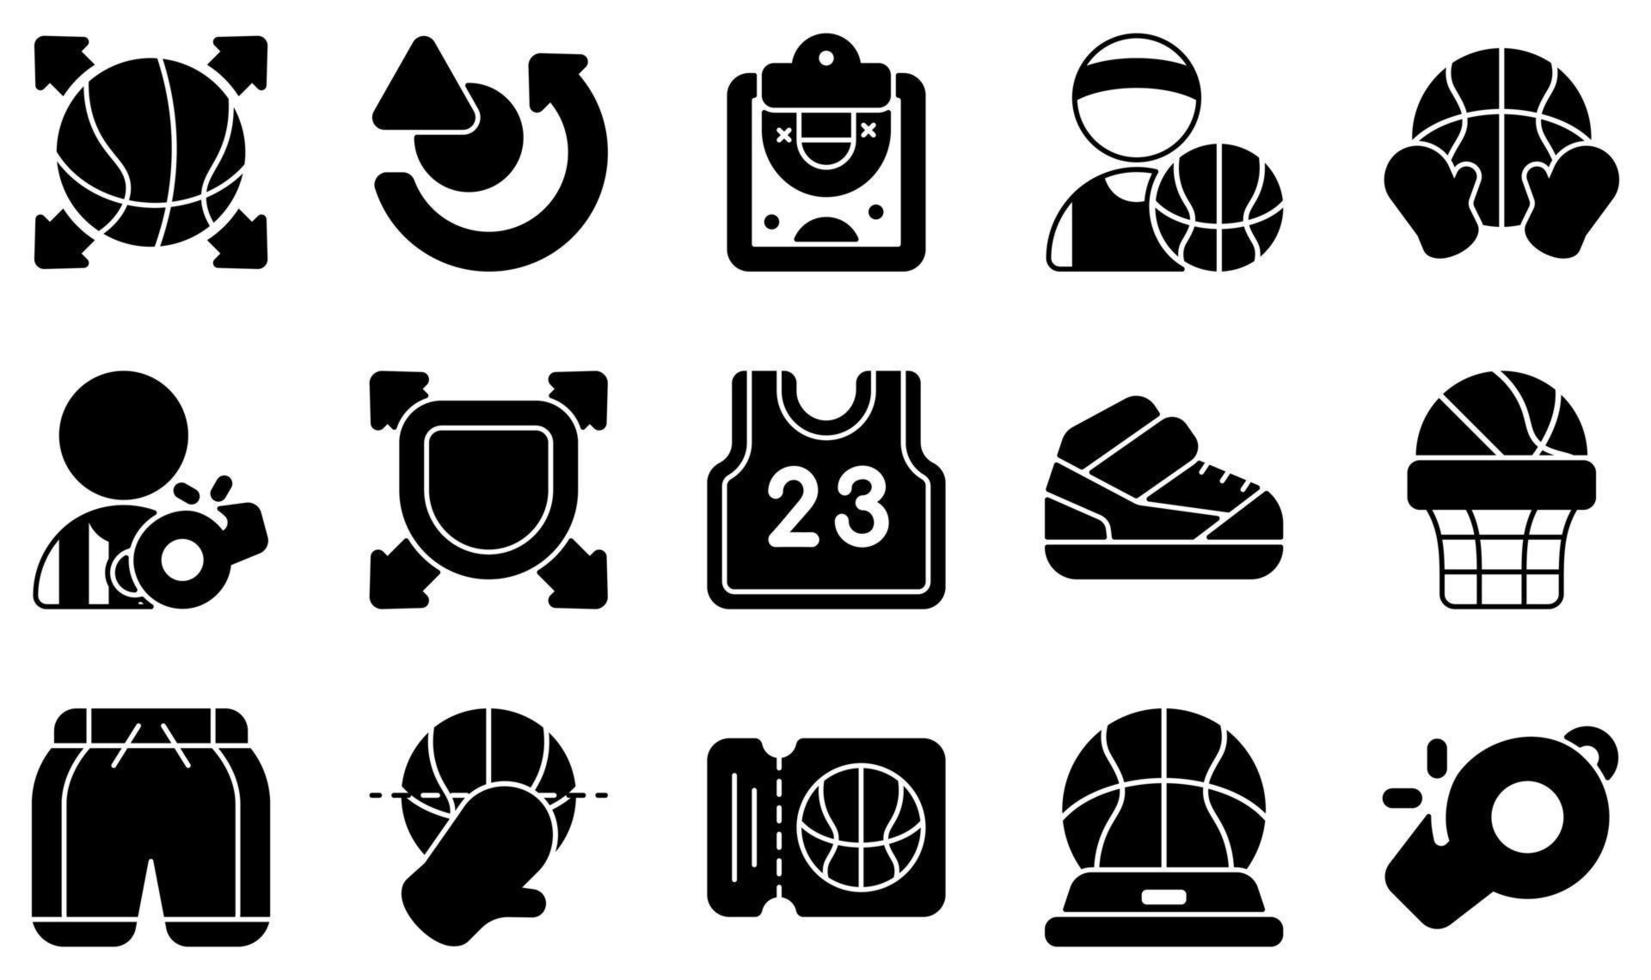 Set of Vector Icons Related to Basketball. Contains such Icons as Pass, Plan, Player, Rebound, Referee, Shirt and more.